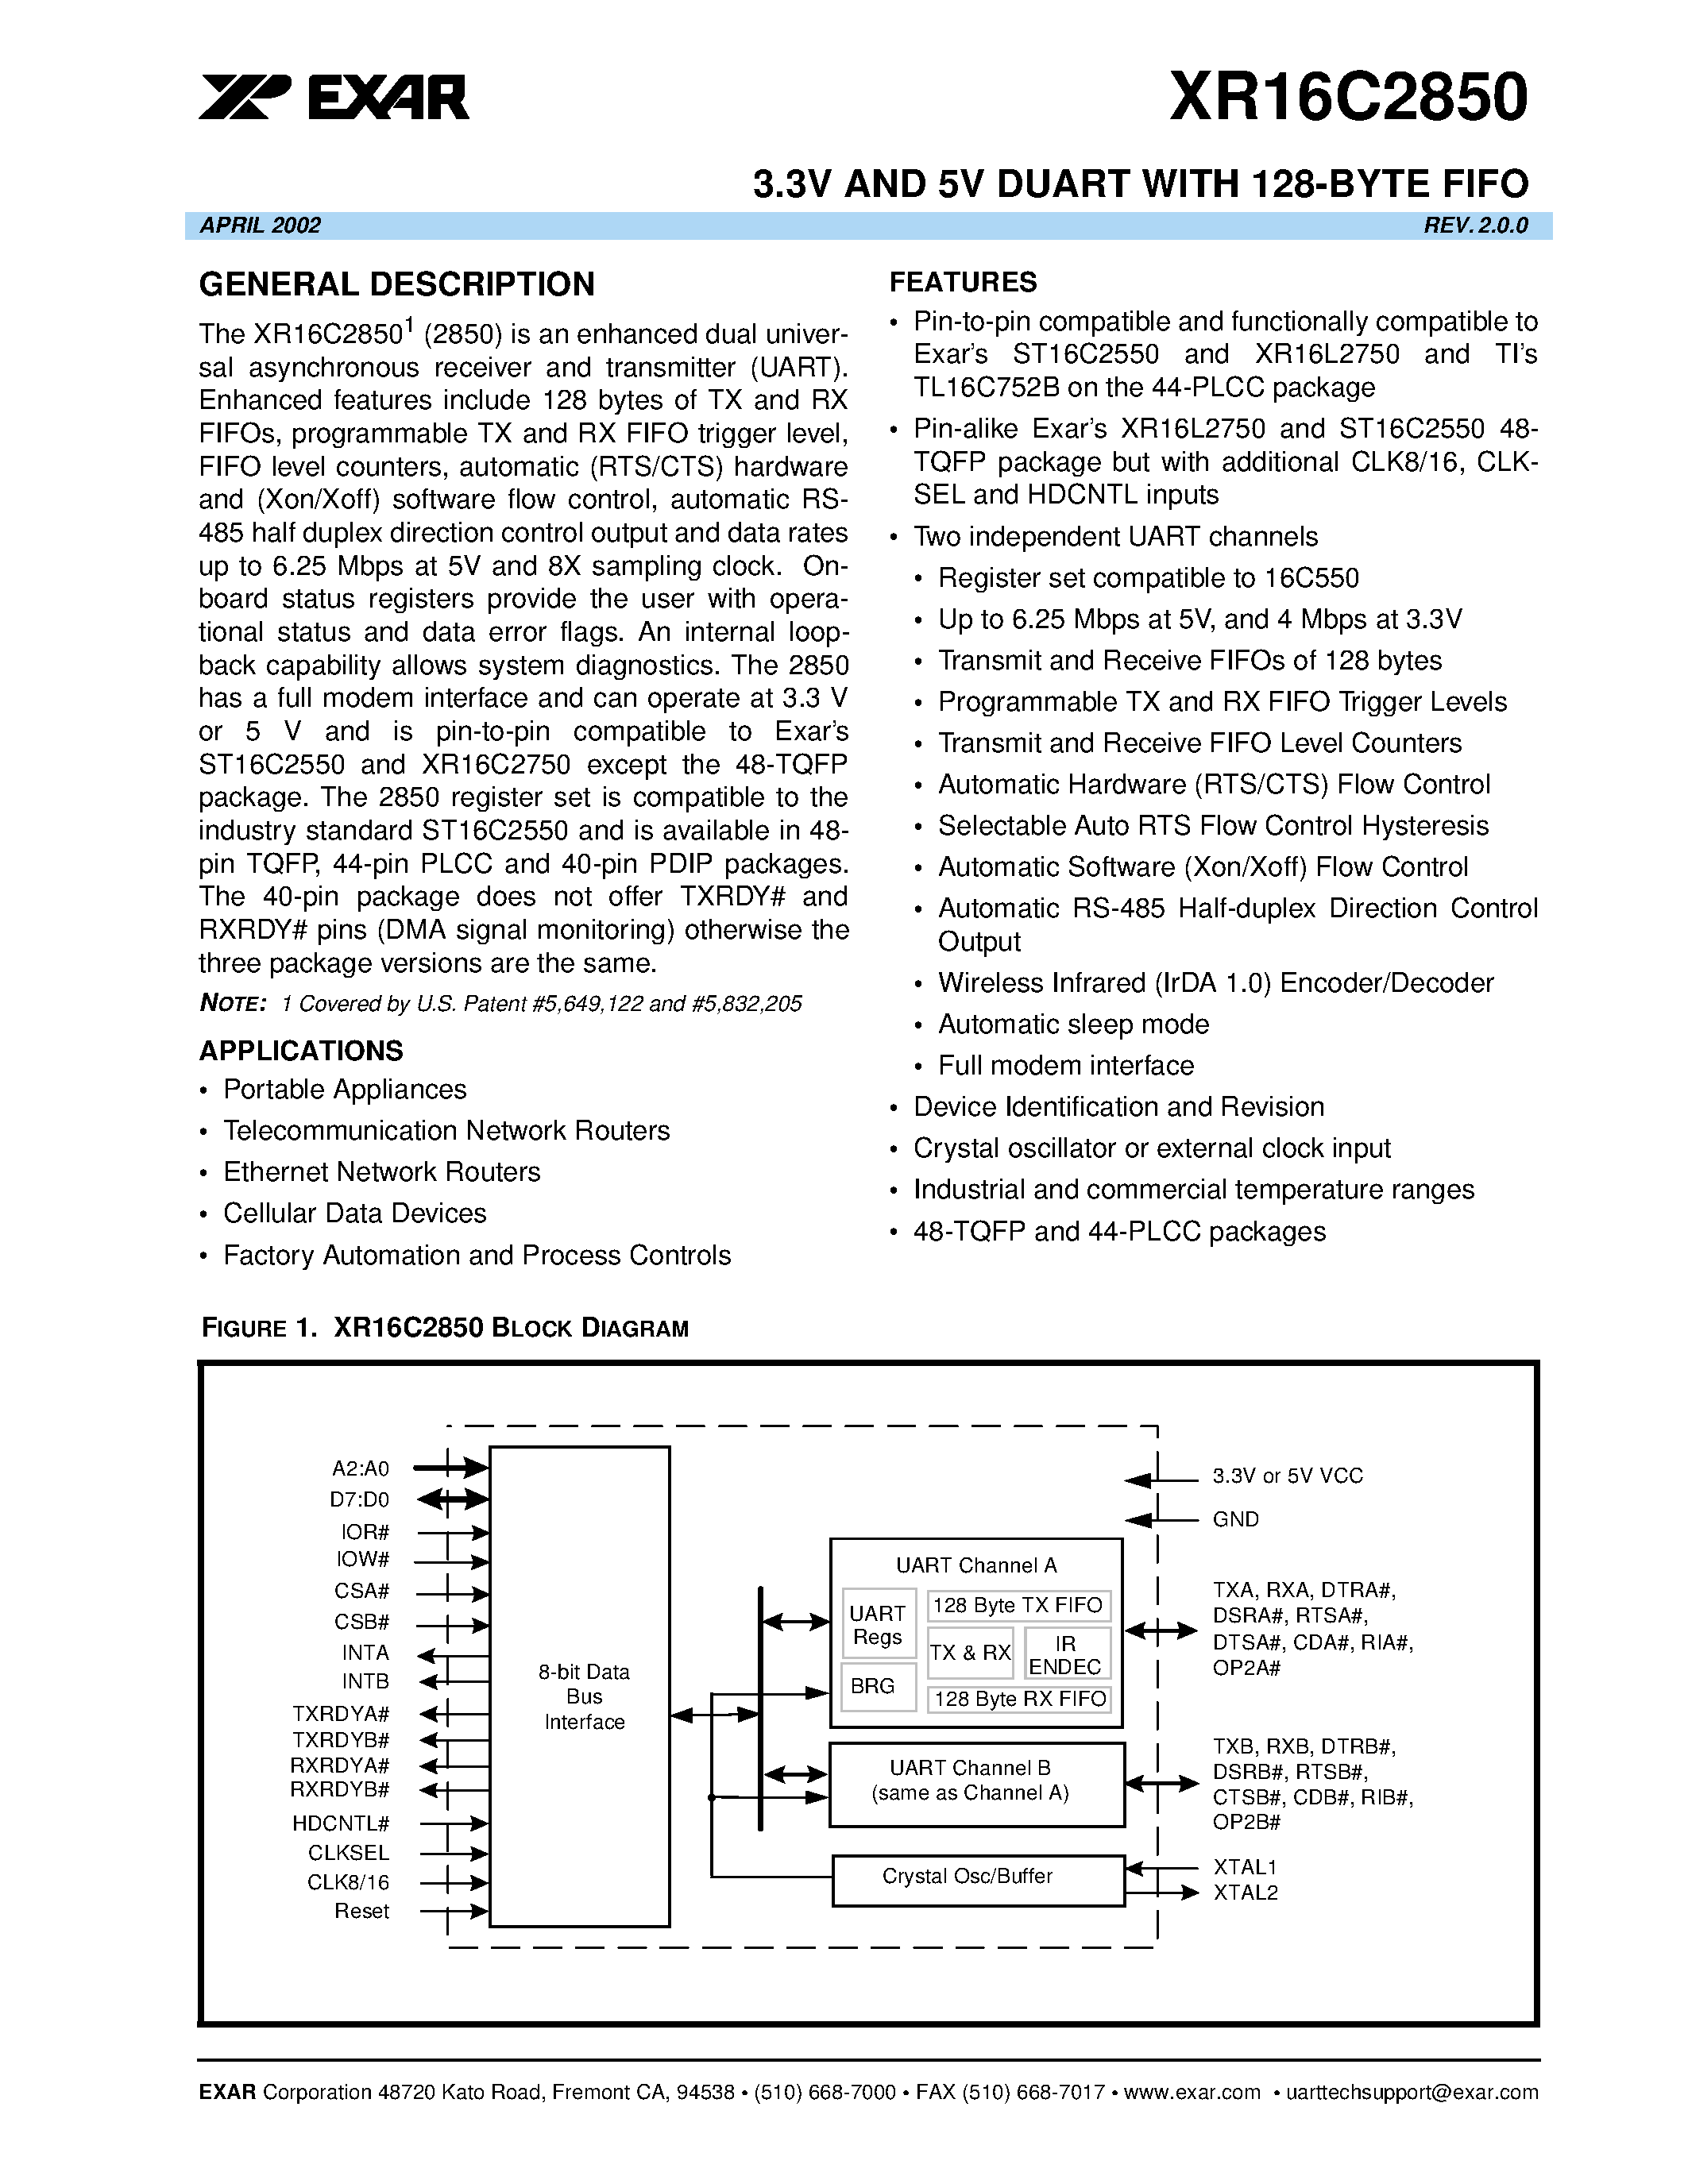 Datasheet XR16C2850 - 3.3V AND 5V DUART WITH 128-BYTE FIFO page 1